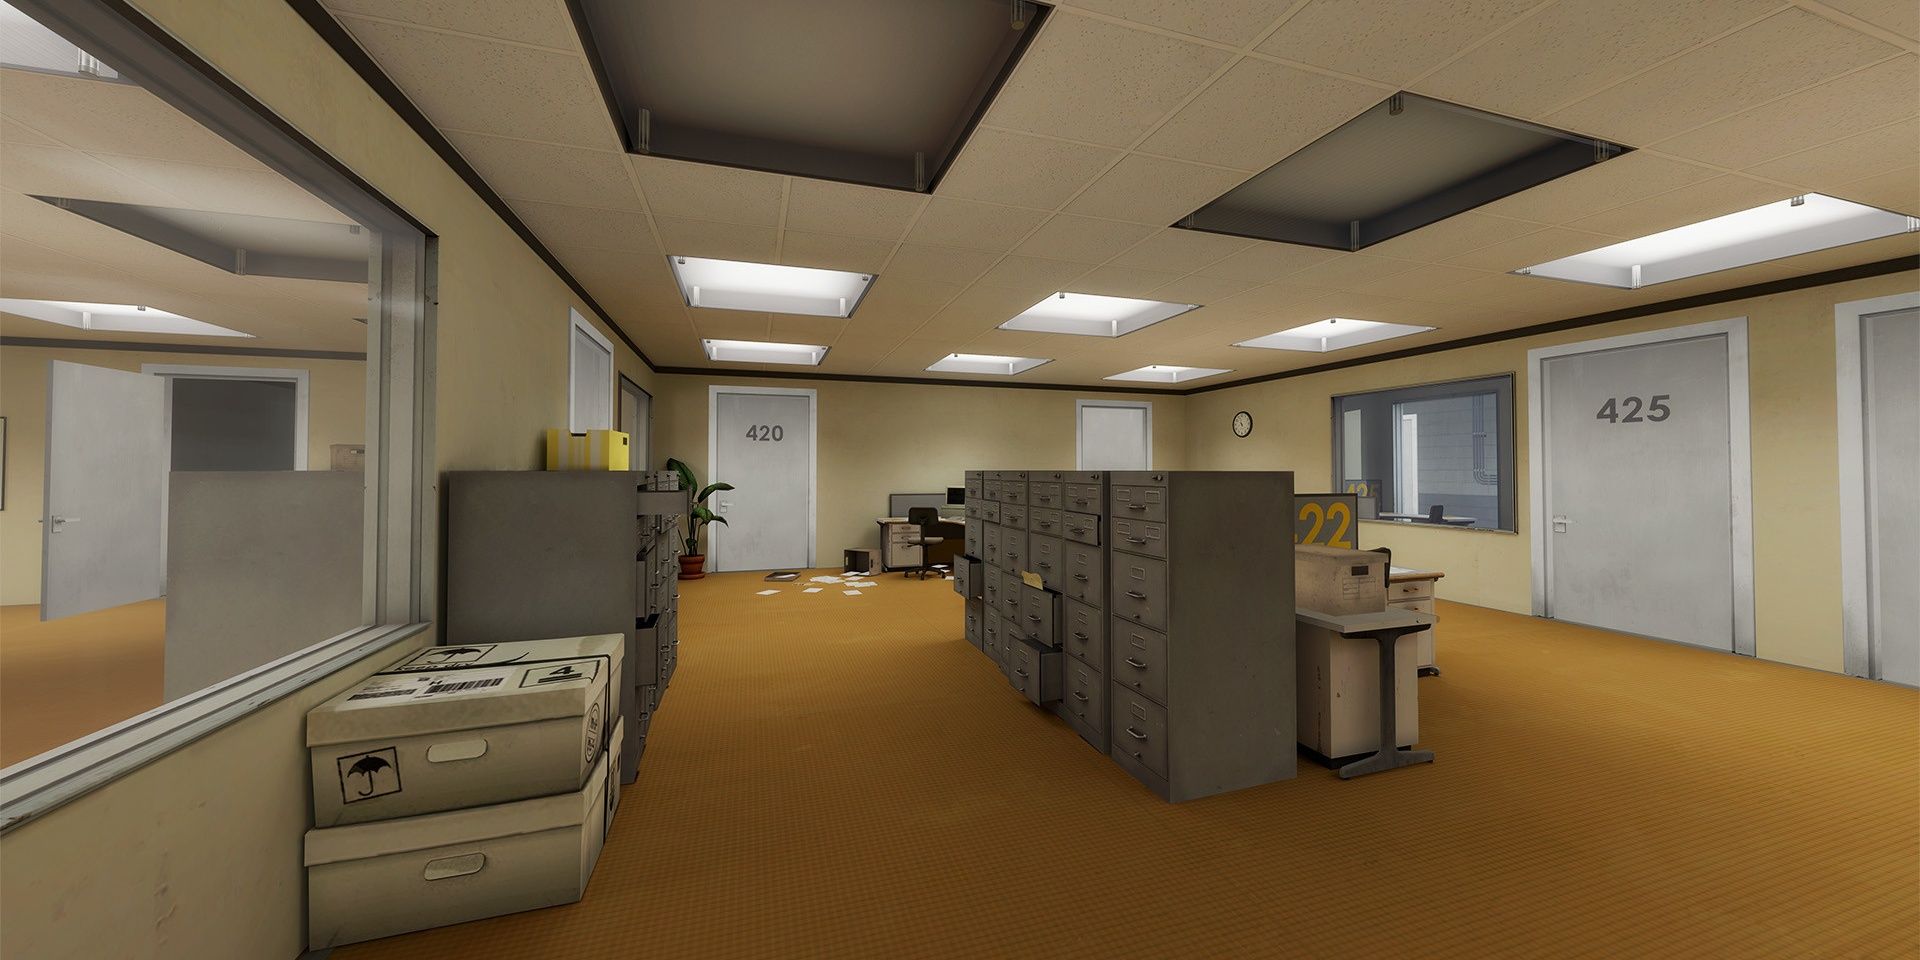 The main office of The Stanley Parable, with doors 420 and 425 visible in the background